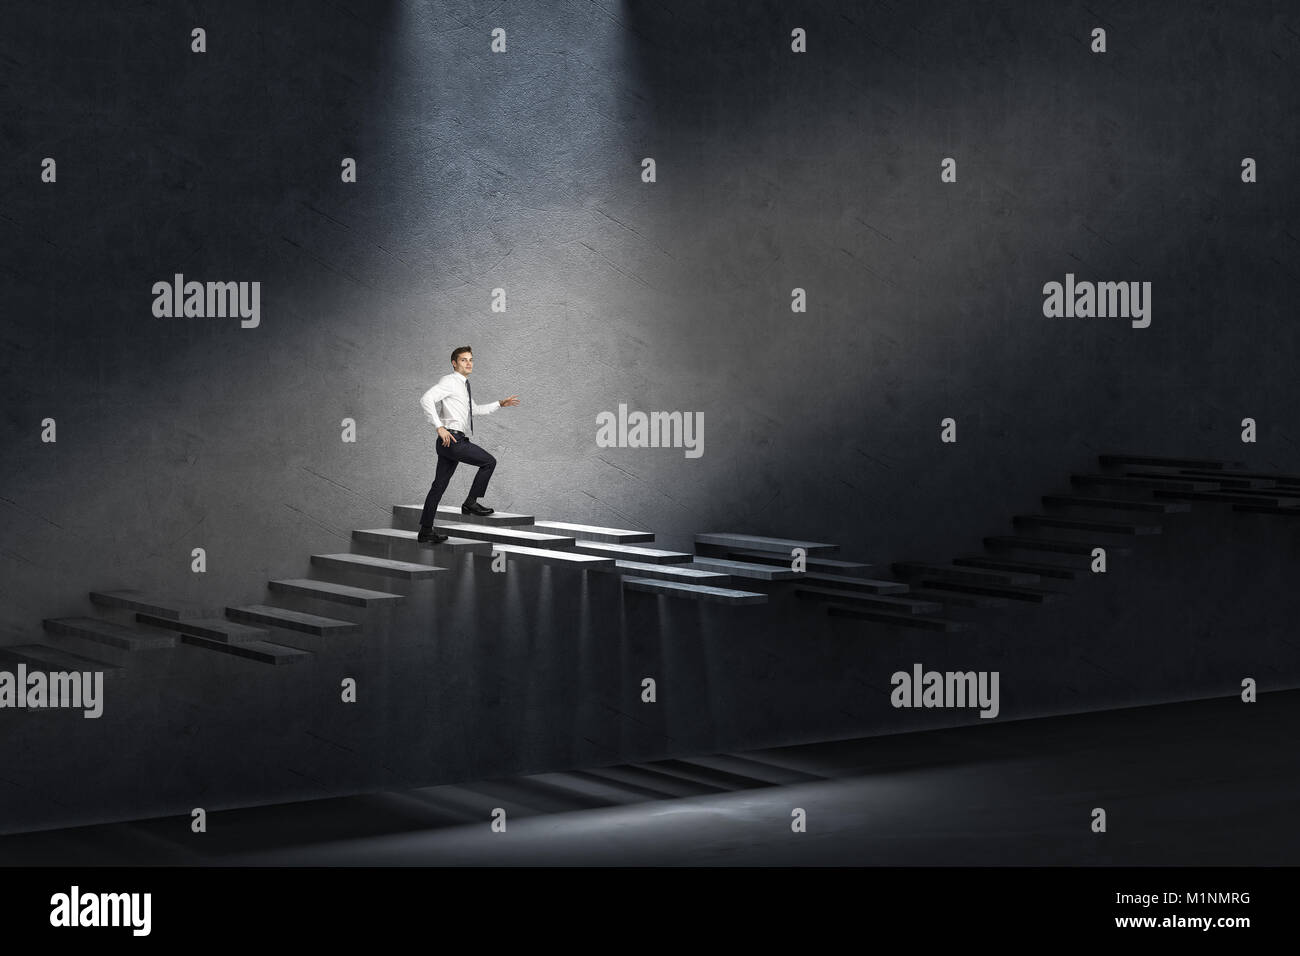 man walks on an abstract 3d staircase uncertainty concept Stock Photo